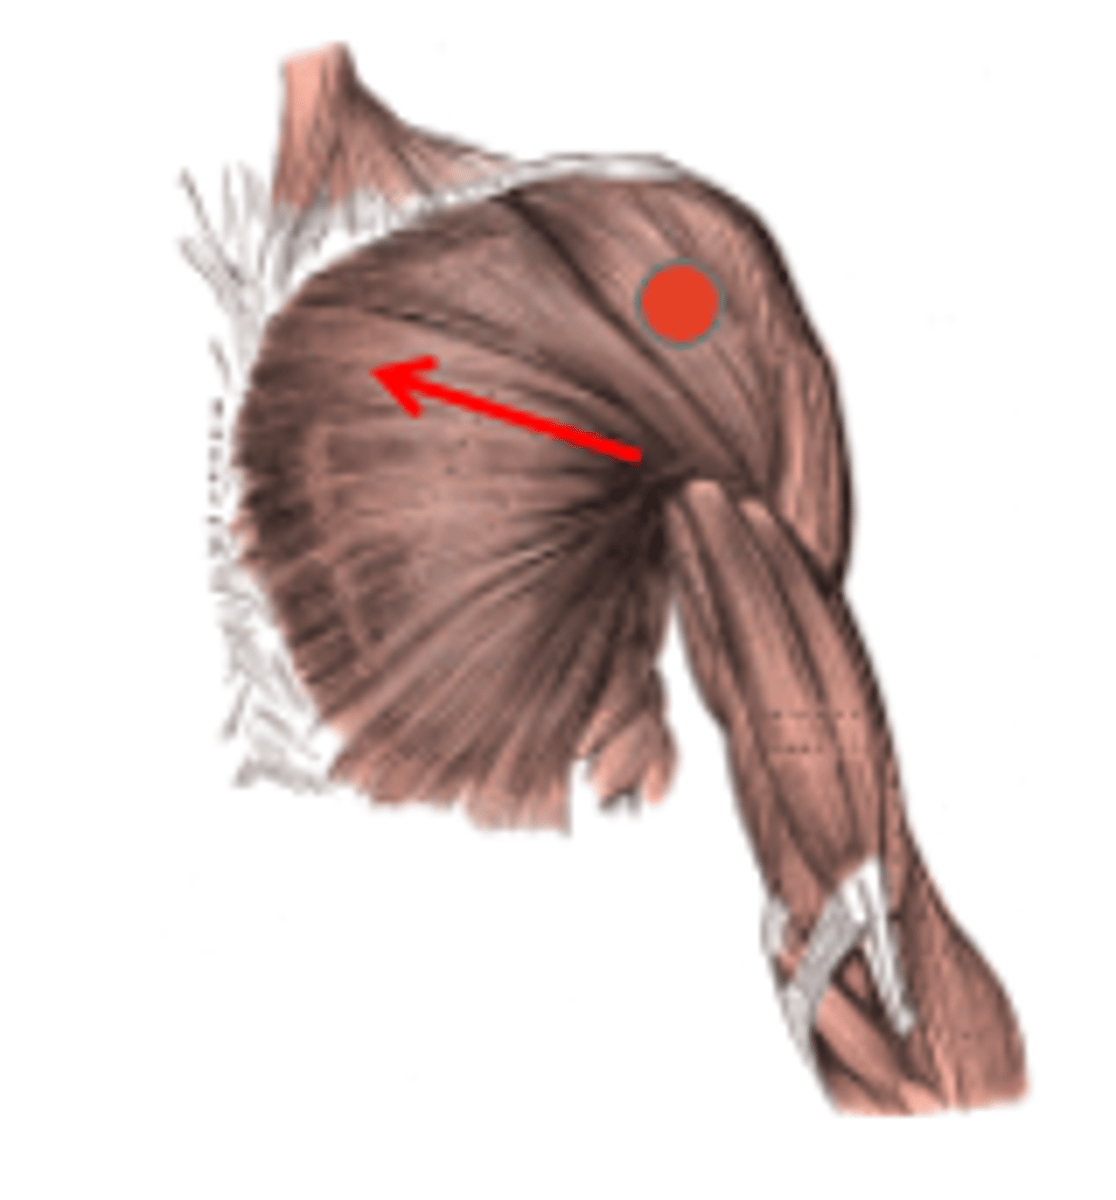 <p>If line of action of muscle passes inferiorly to sagittal or A/P axis (thick line going front/back), muscle will ________</p>